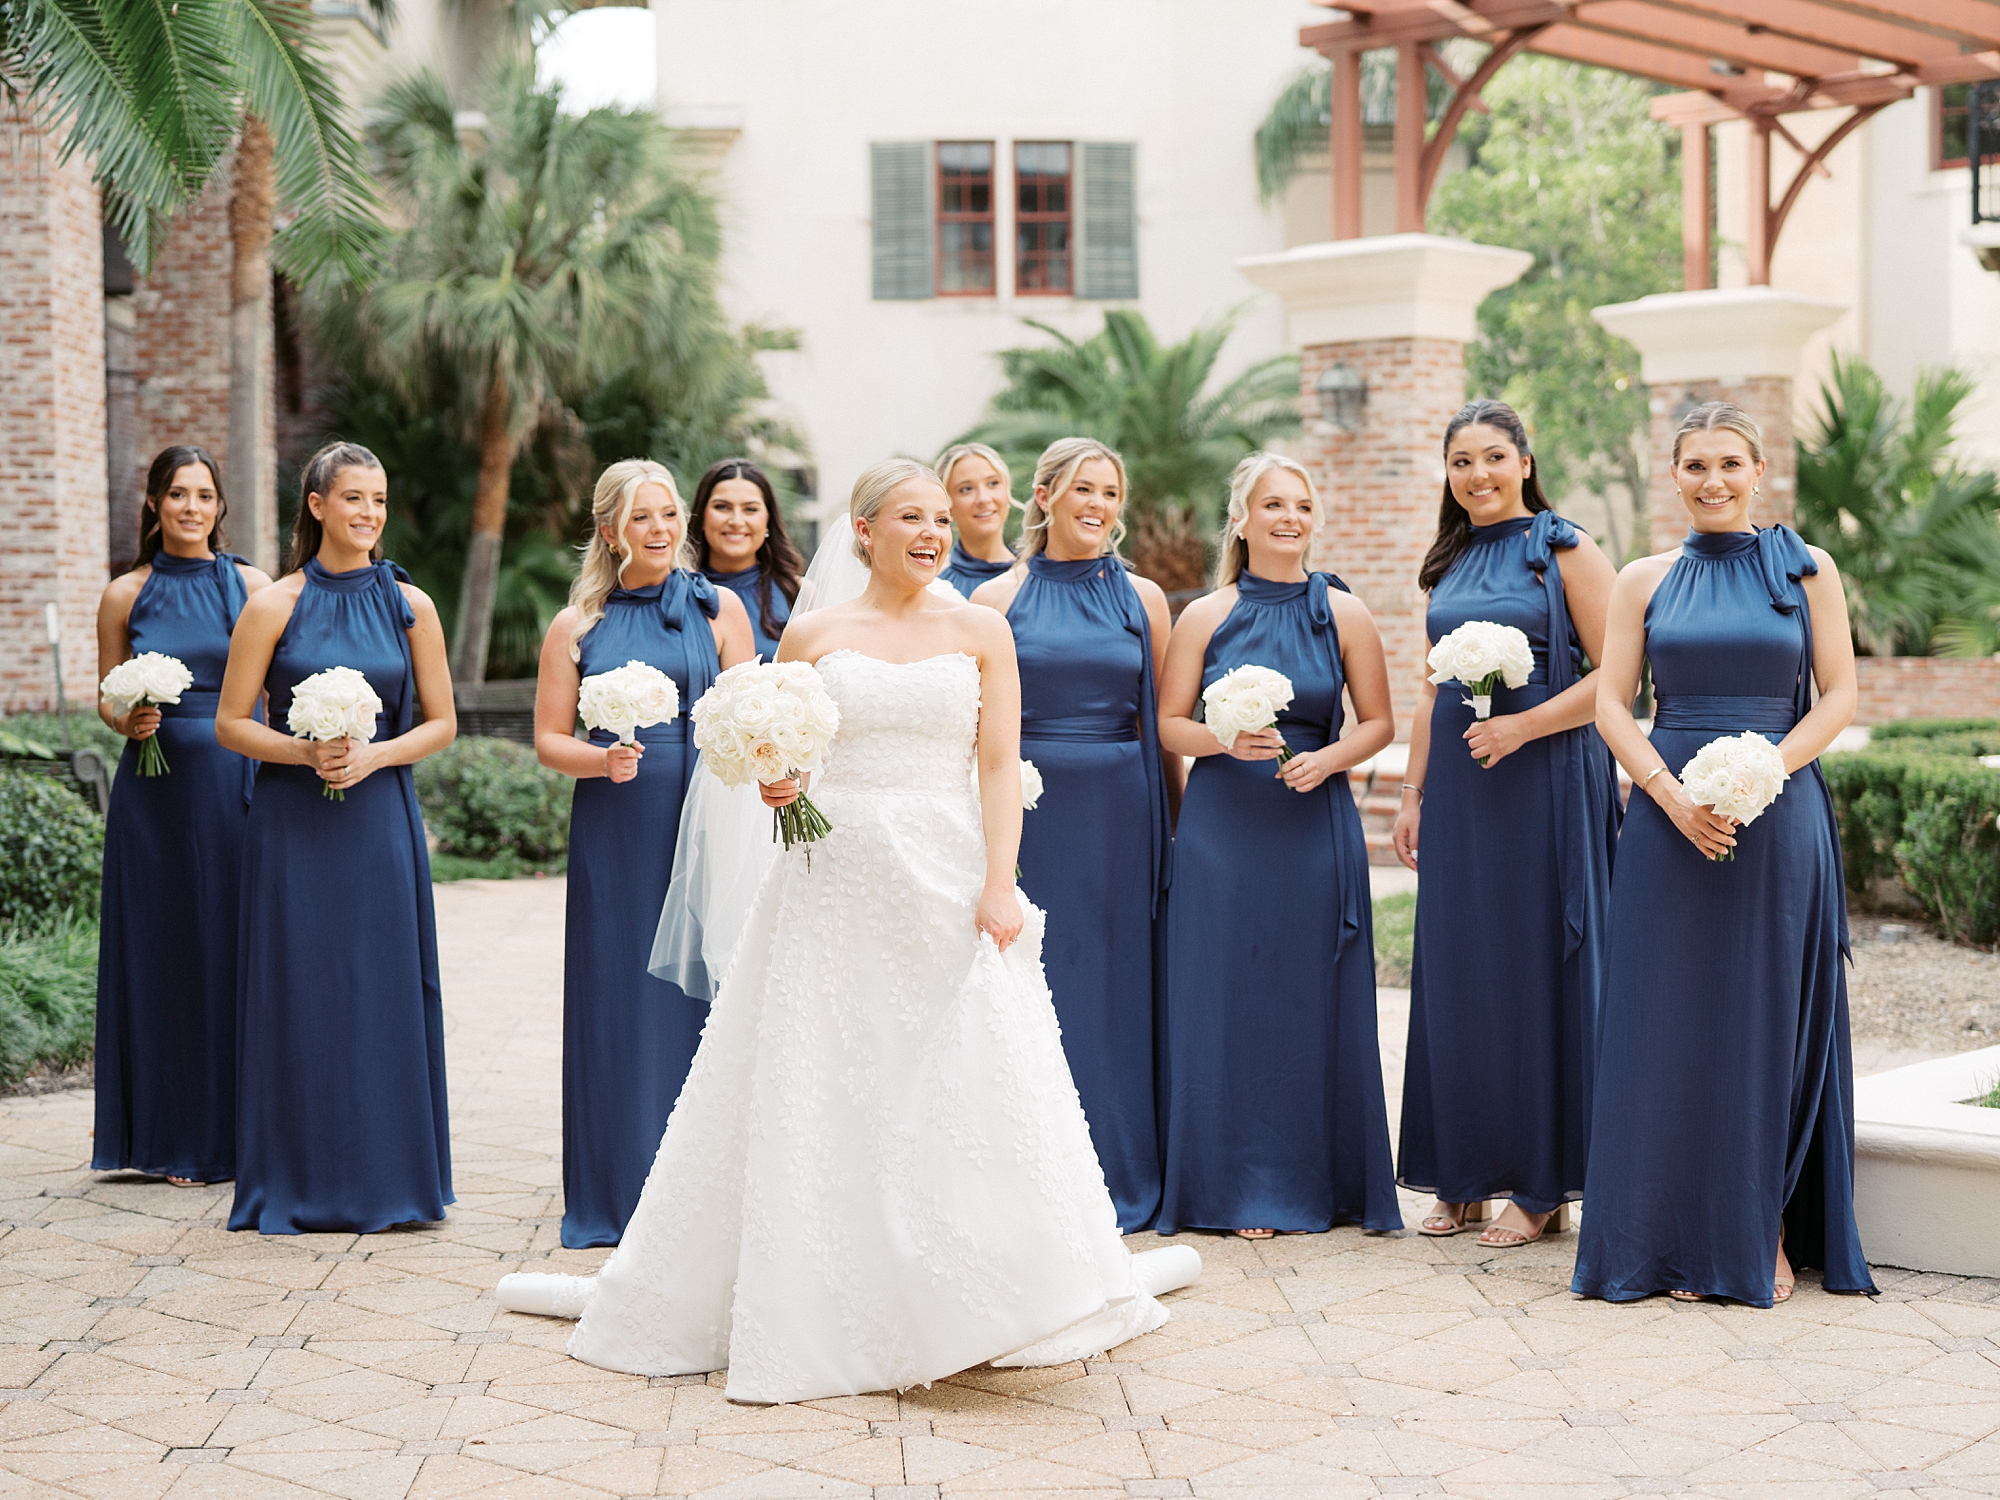 bride walks with bridesmaids in blue gowns carrying white flowers 